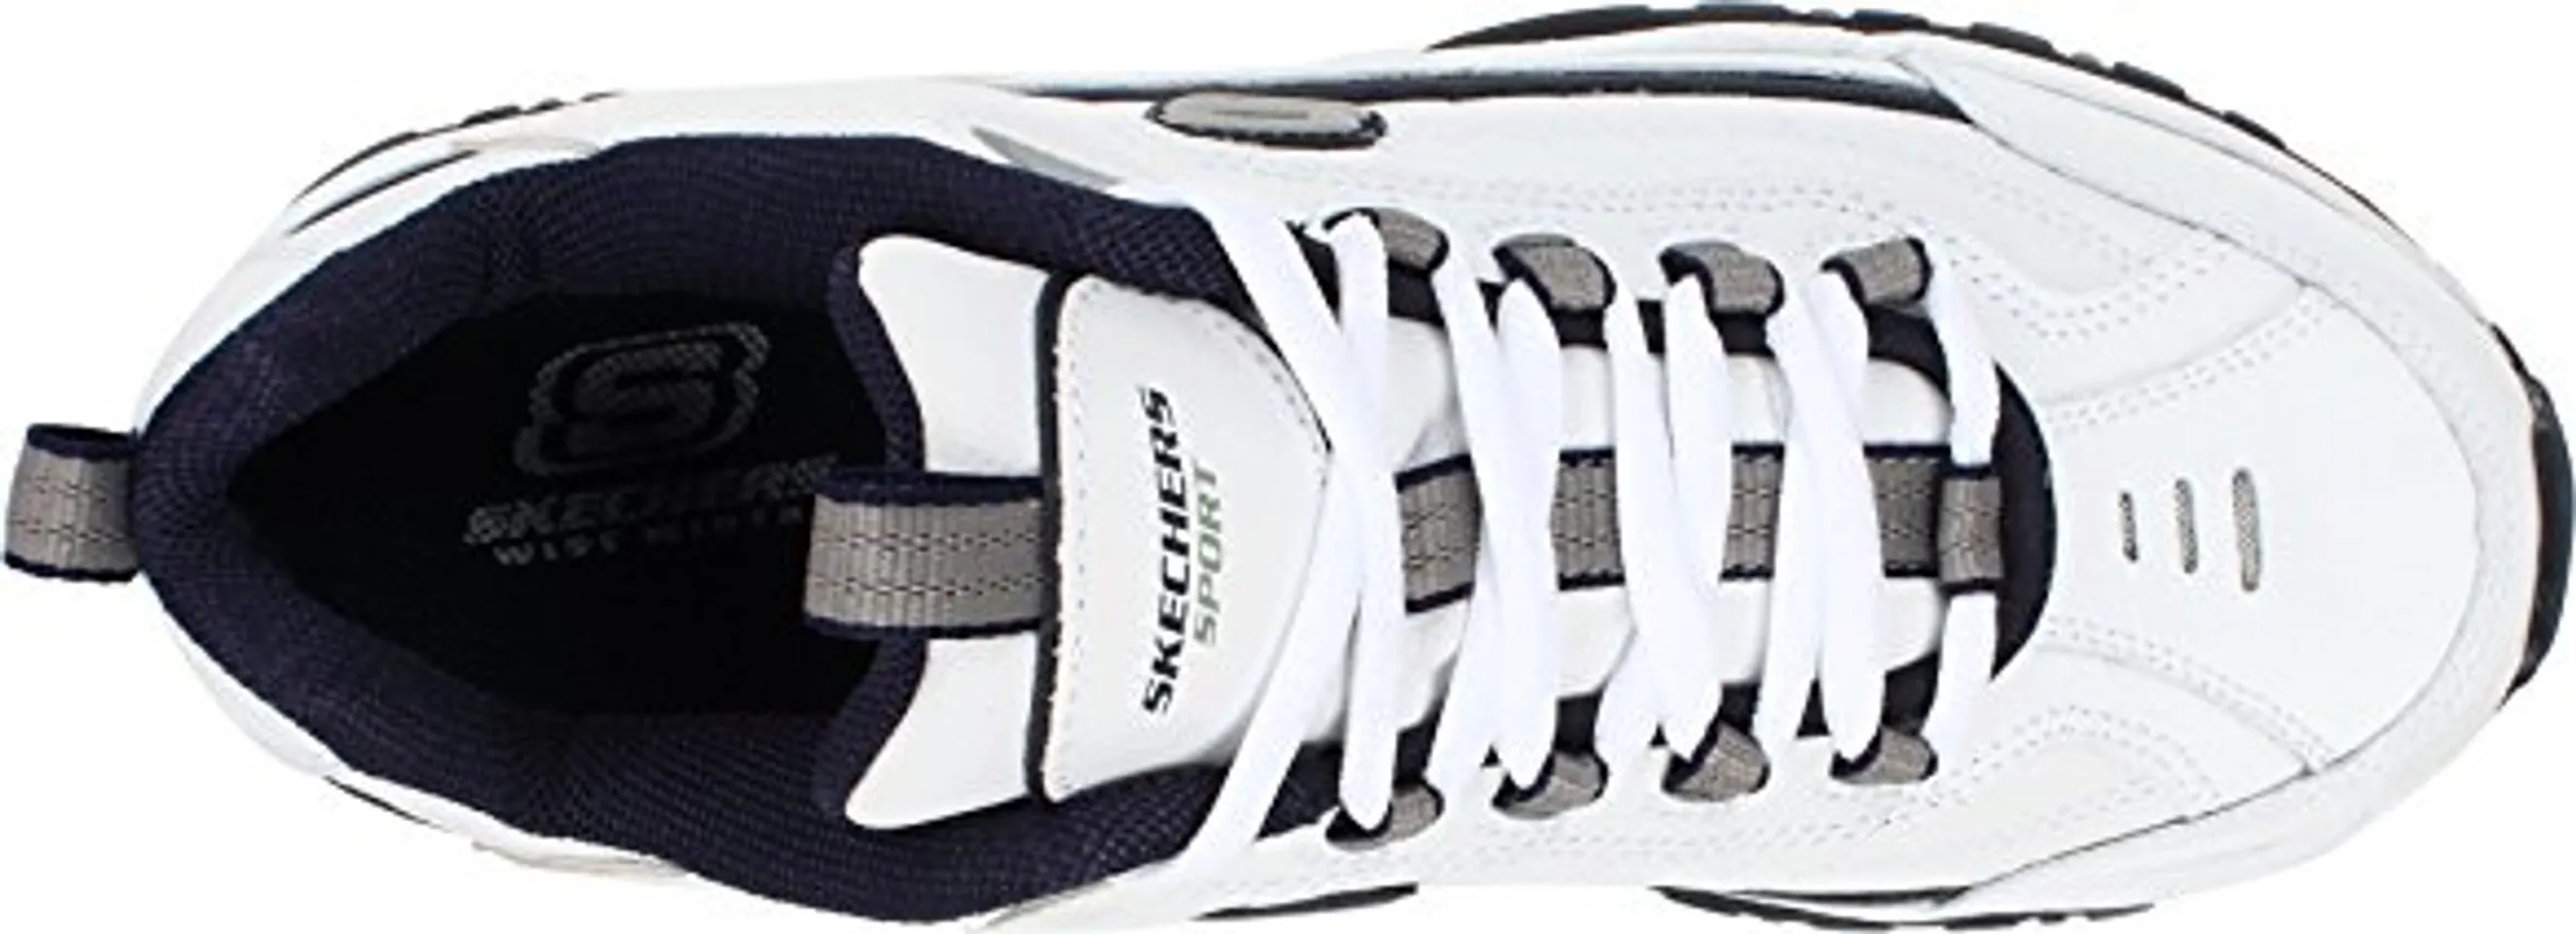 Giày thể thao nam Skechers Energy Afterburn White/Navy 5